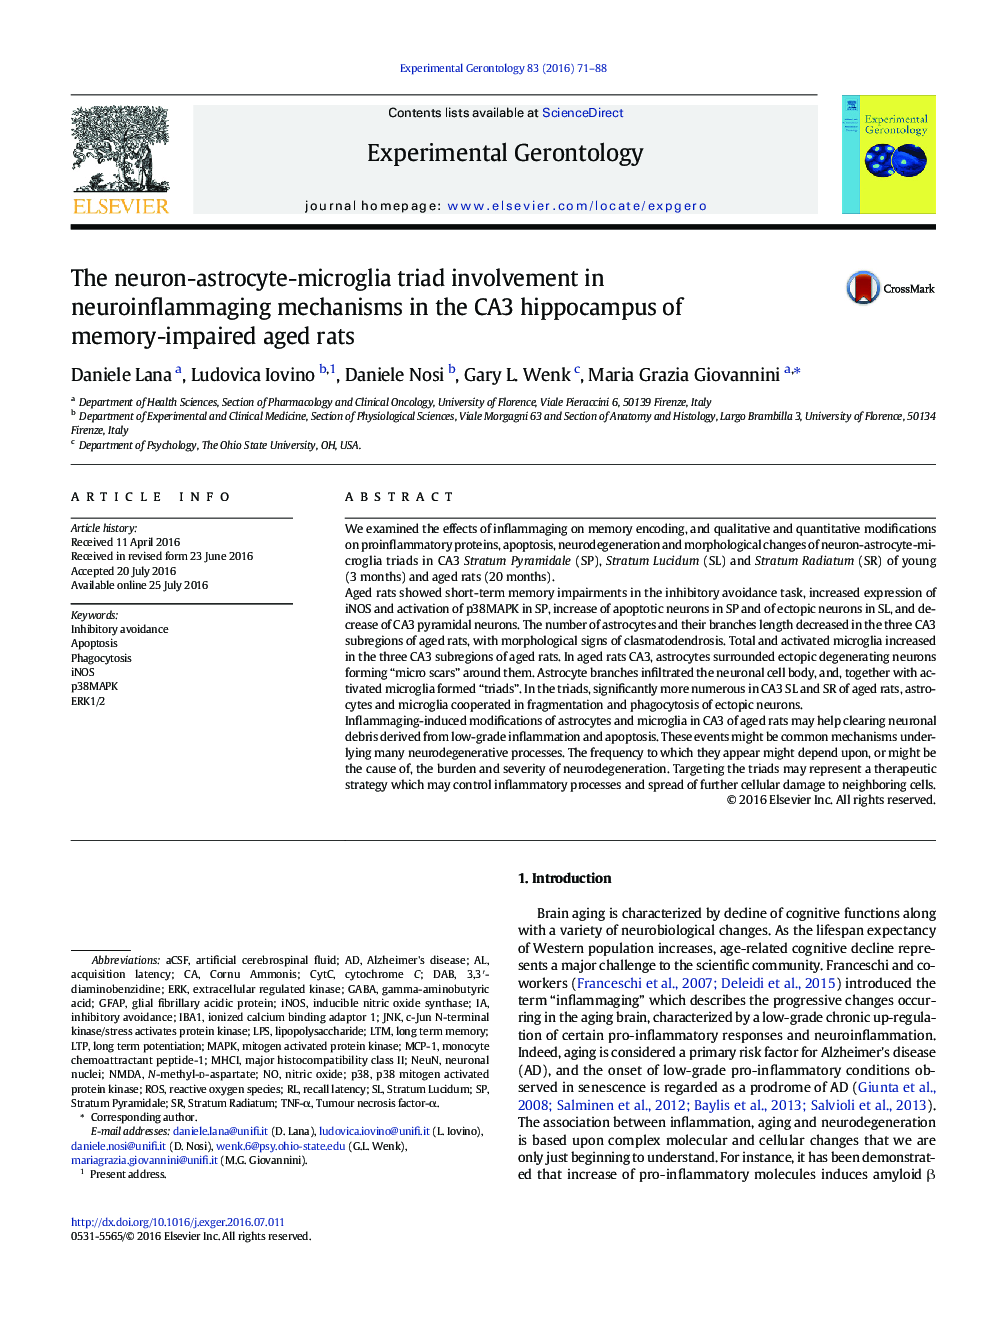 The neuron-astrocyte-microglia triad involvement in neuroinflammaging mechanisms in the CA3 hippocampus of memory-impaired aged rats